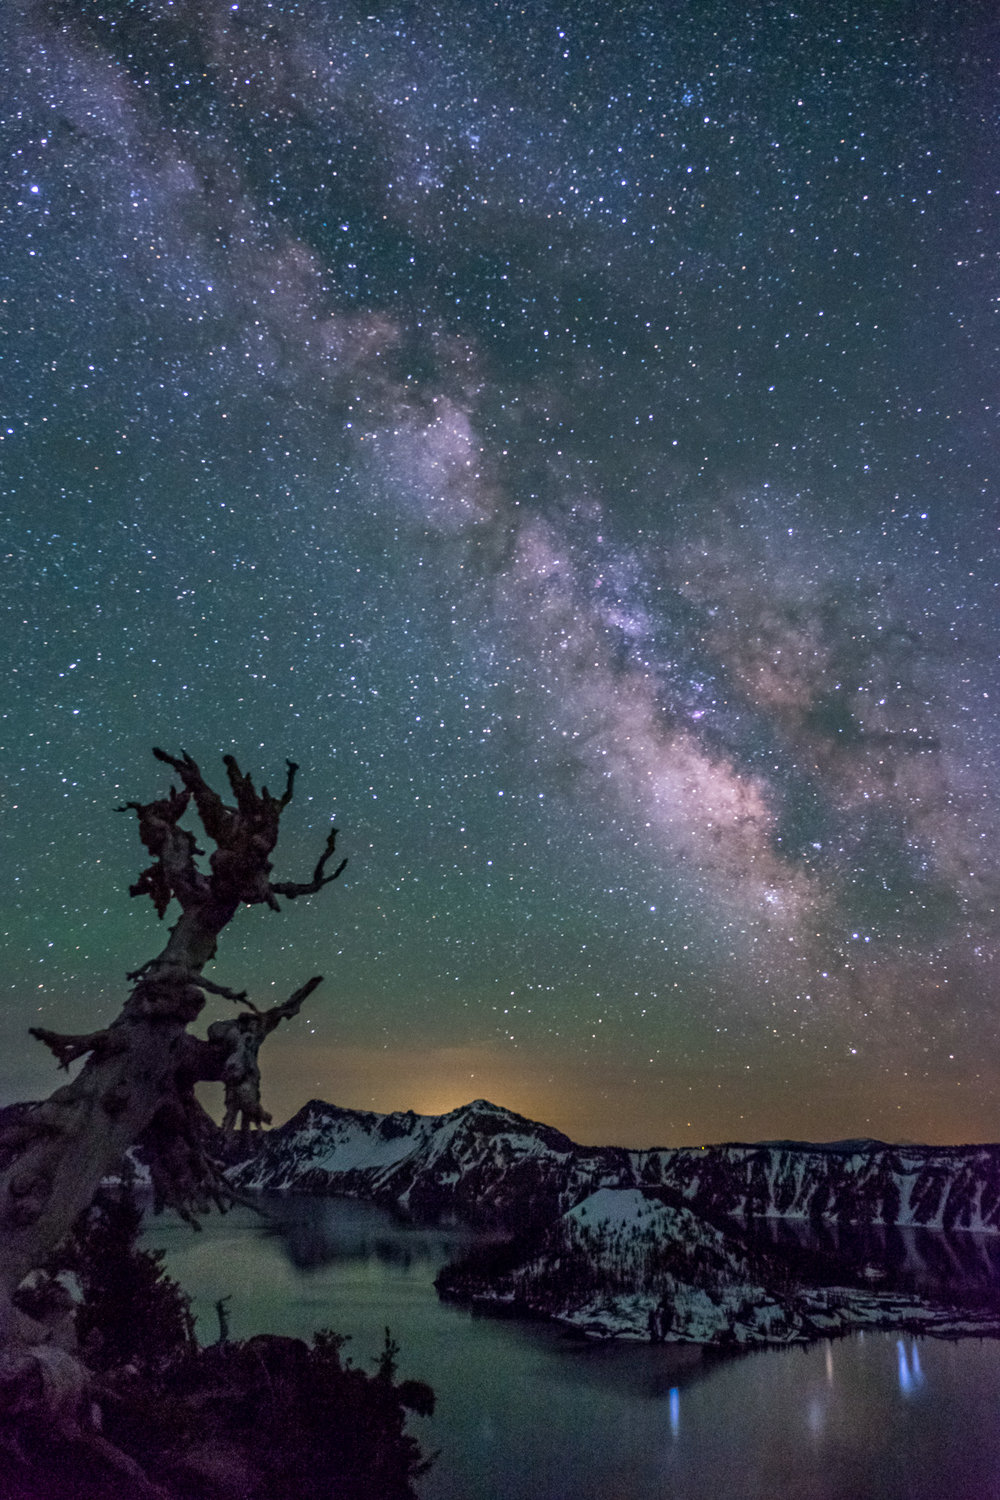 The night skies are incredible in Crater Lake.